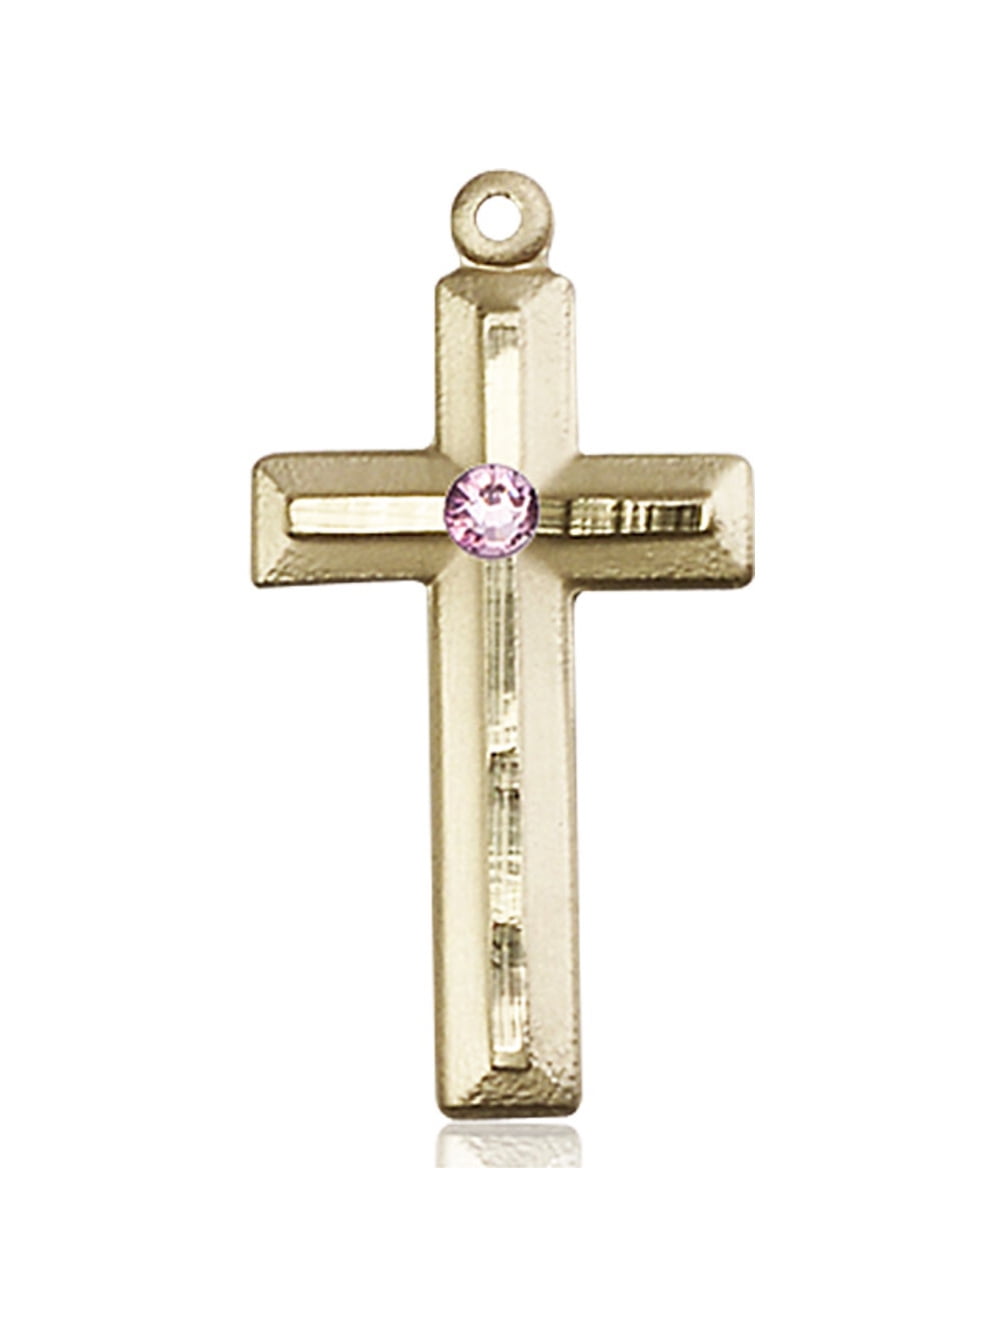 14kt Yellow Gold Cross Medal with 3mm Light February Purple Swarovski  Crystal 1 1/8 x 1/2 inches